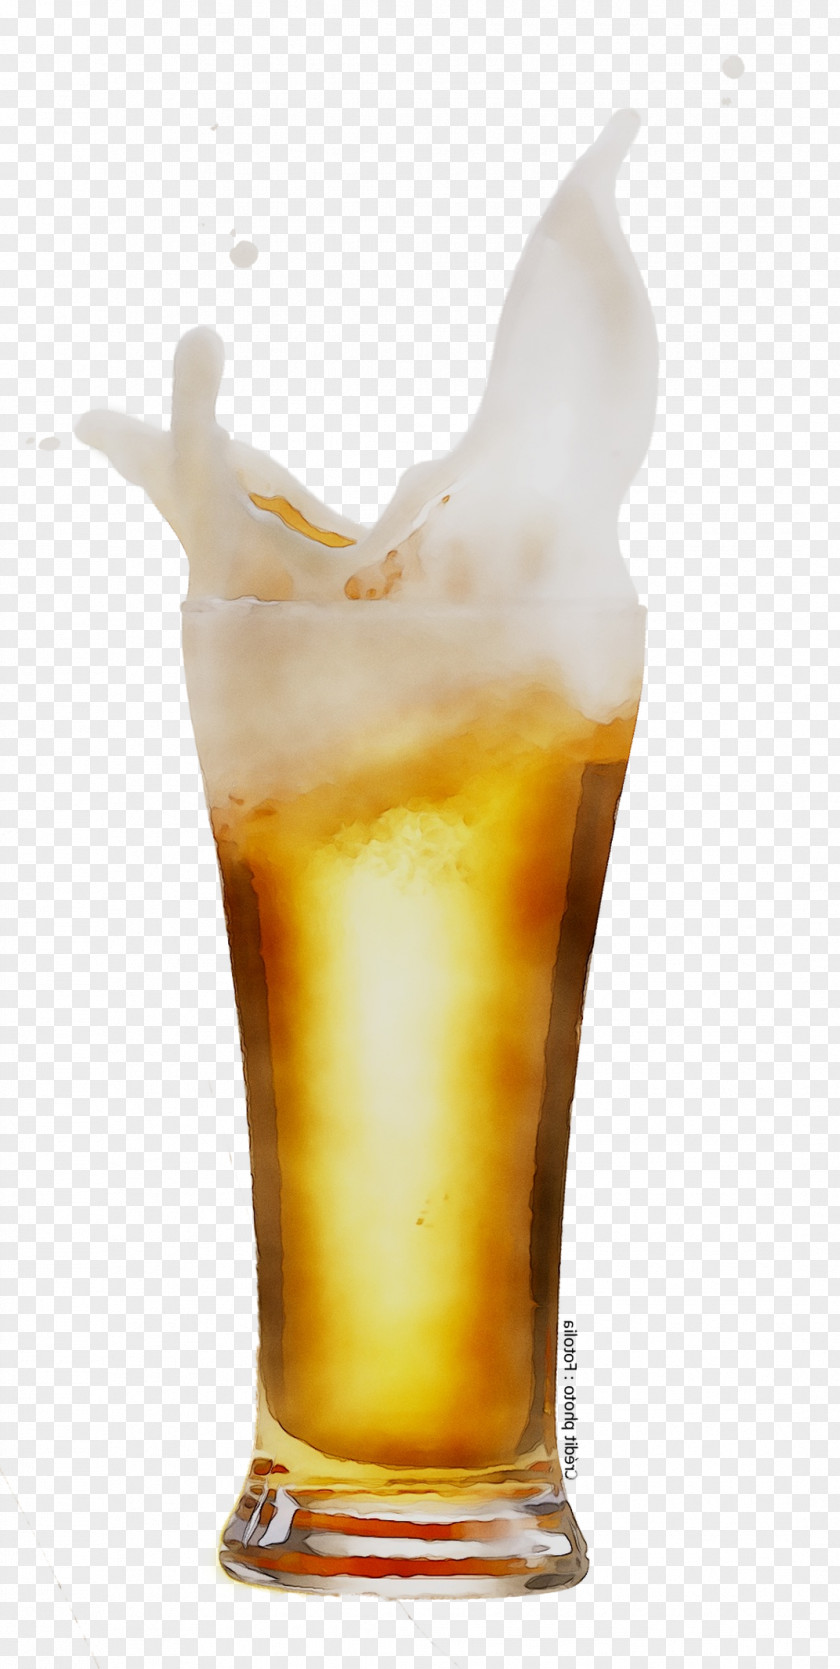 Non-alcoholic Drink Iced Tea Beer Glasses Sweetened Beverage PNG